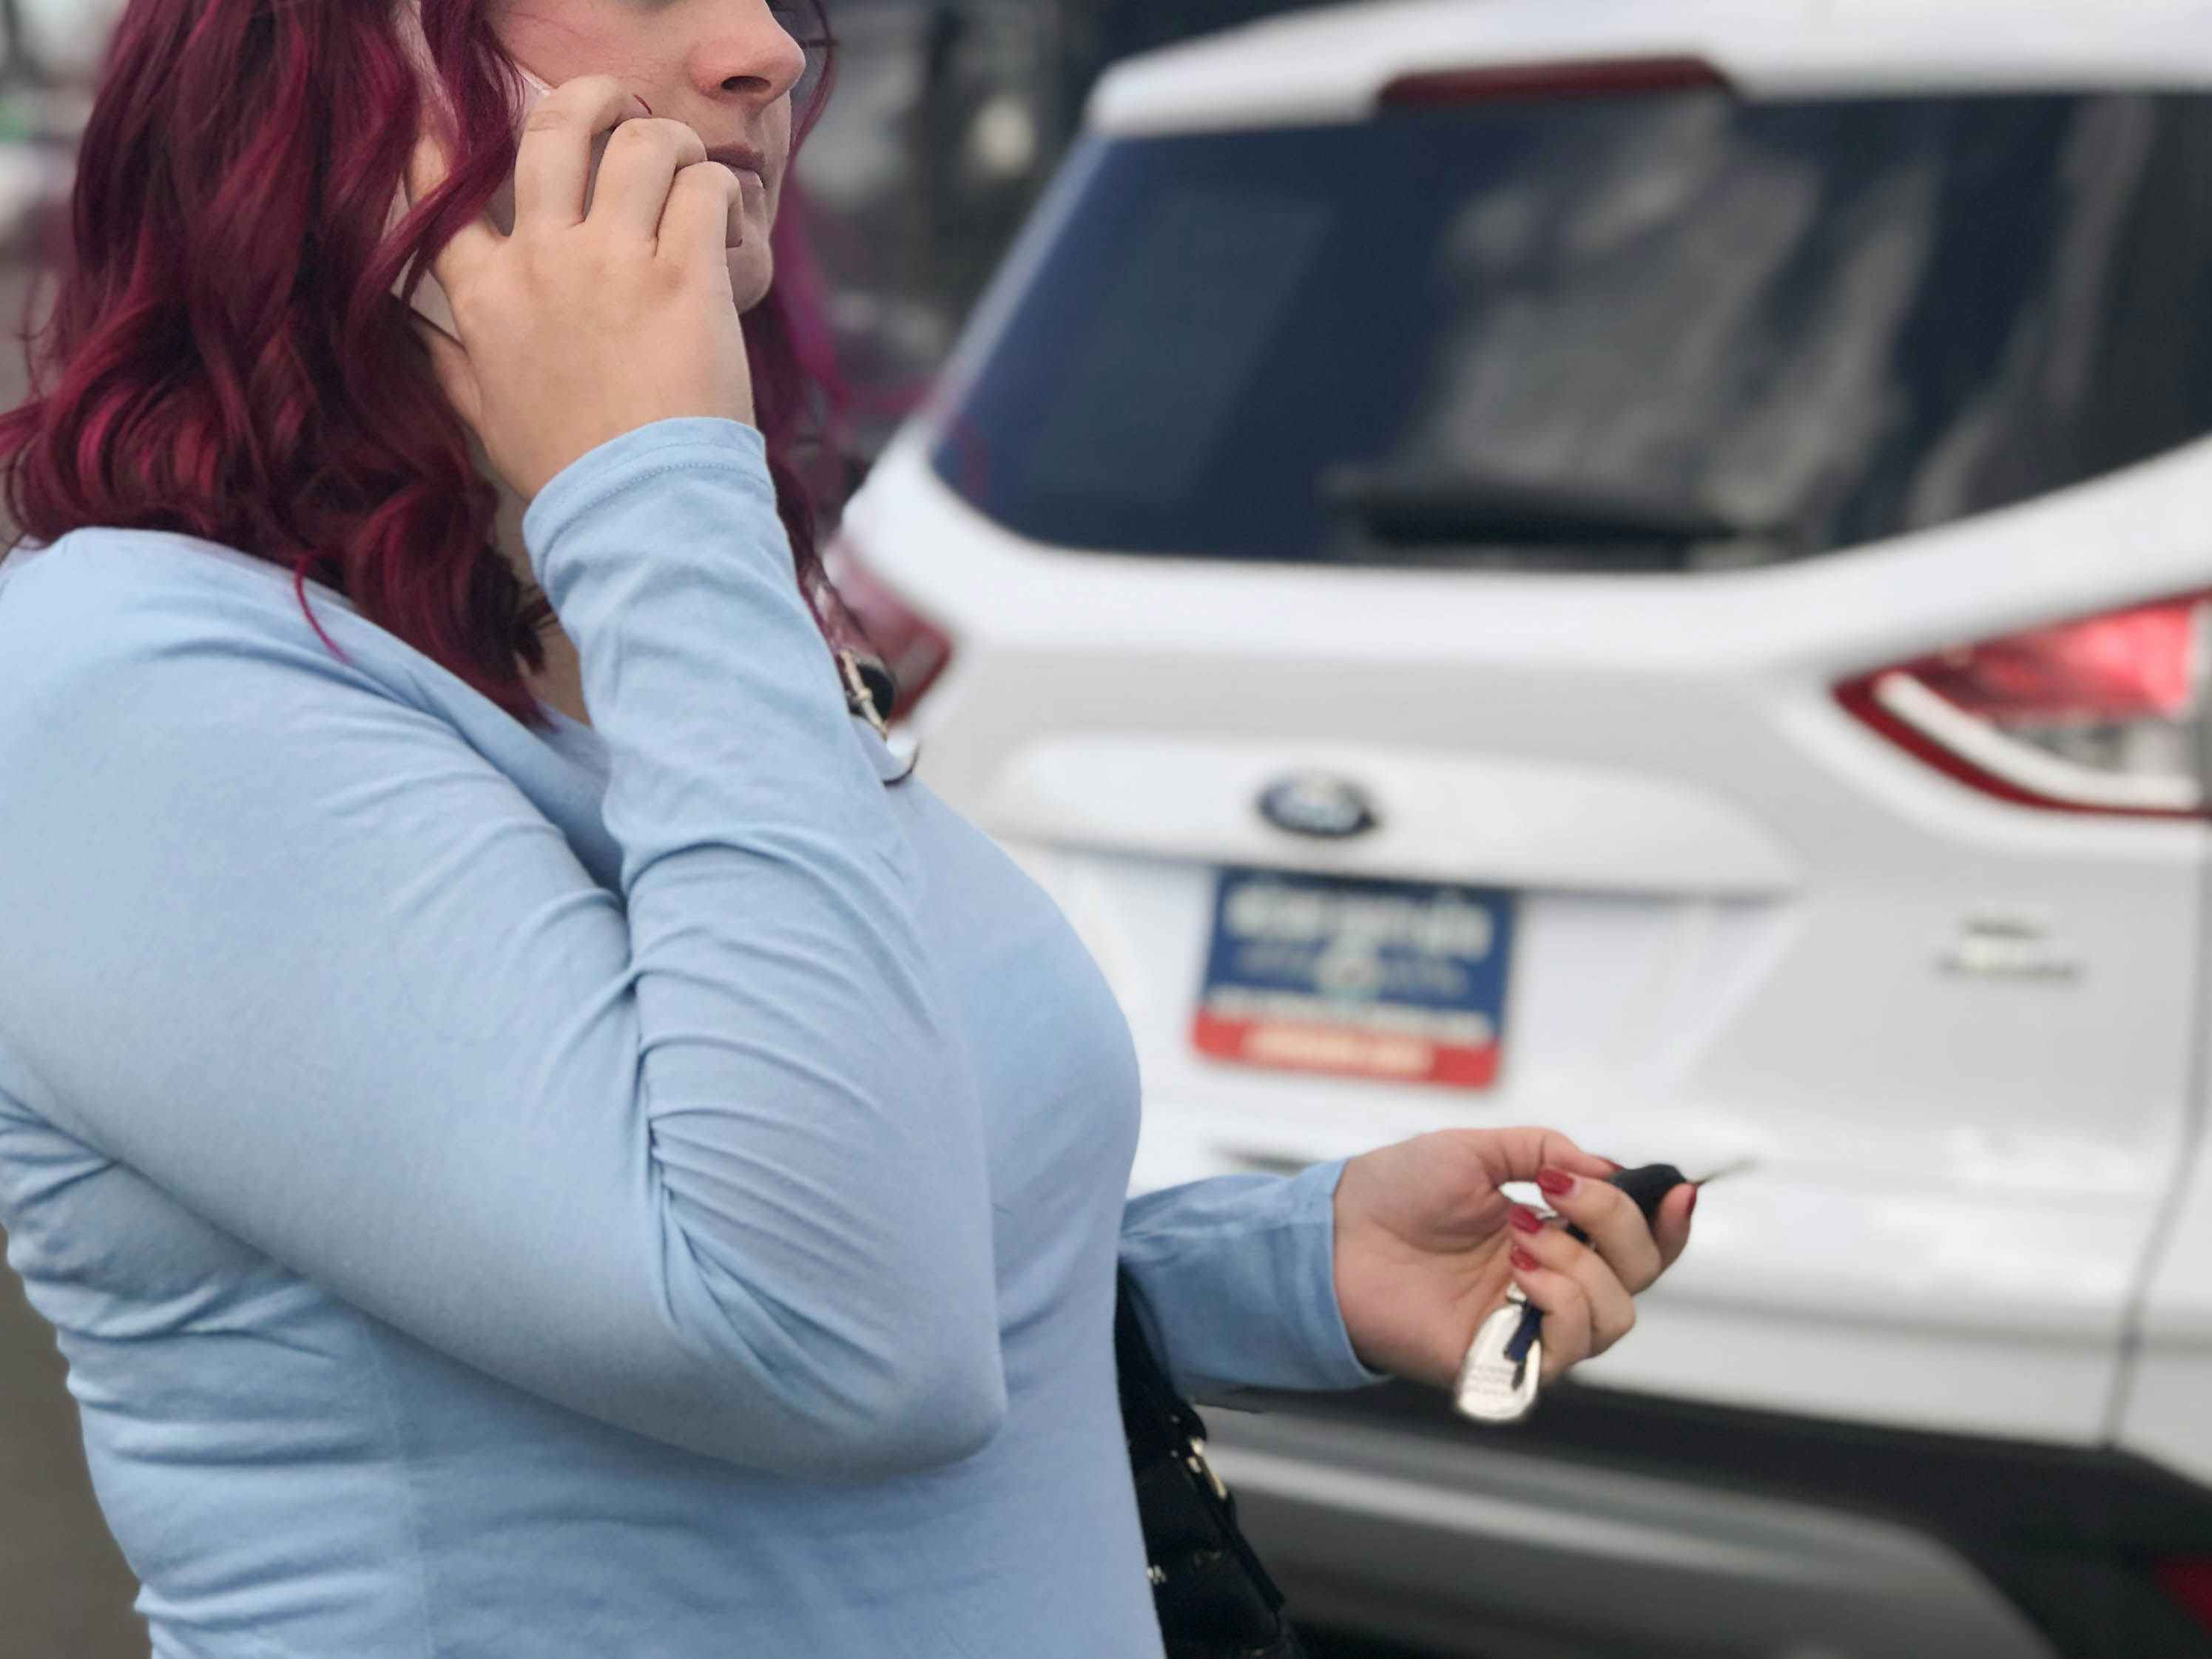 A person on the phone, holding a set of keys and standing in a dealership parking lot.